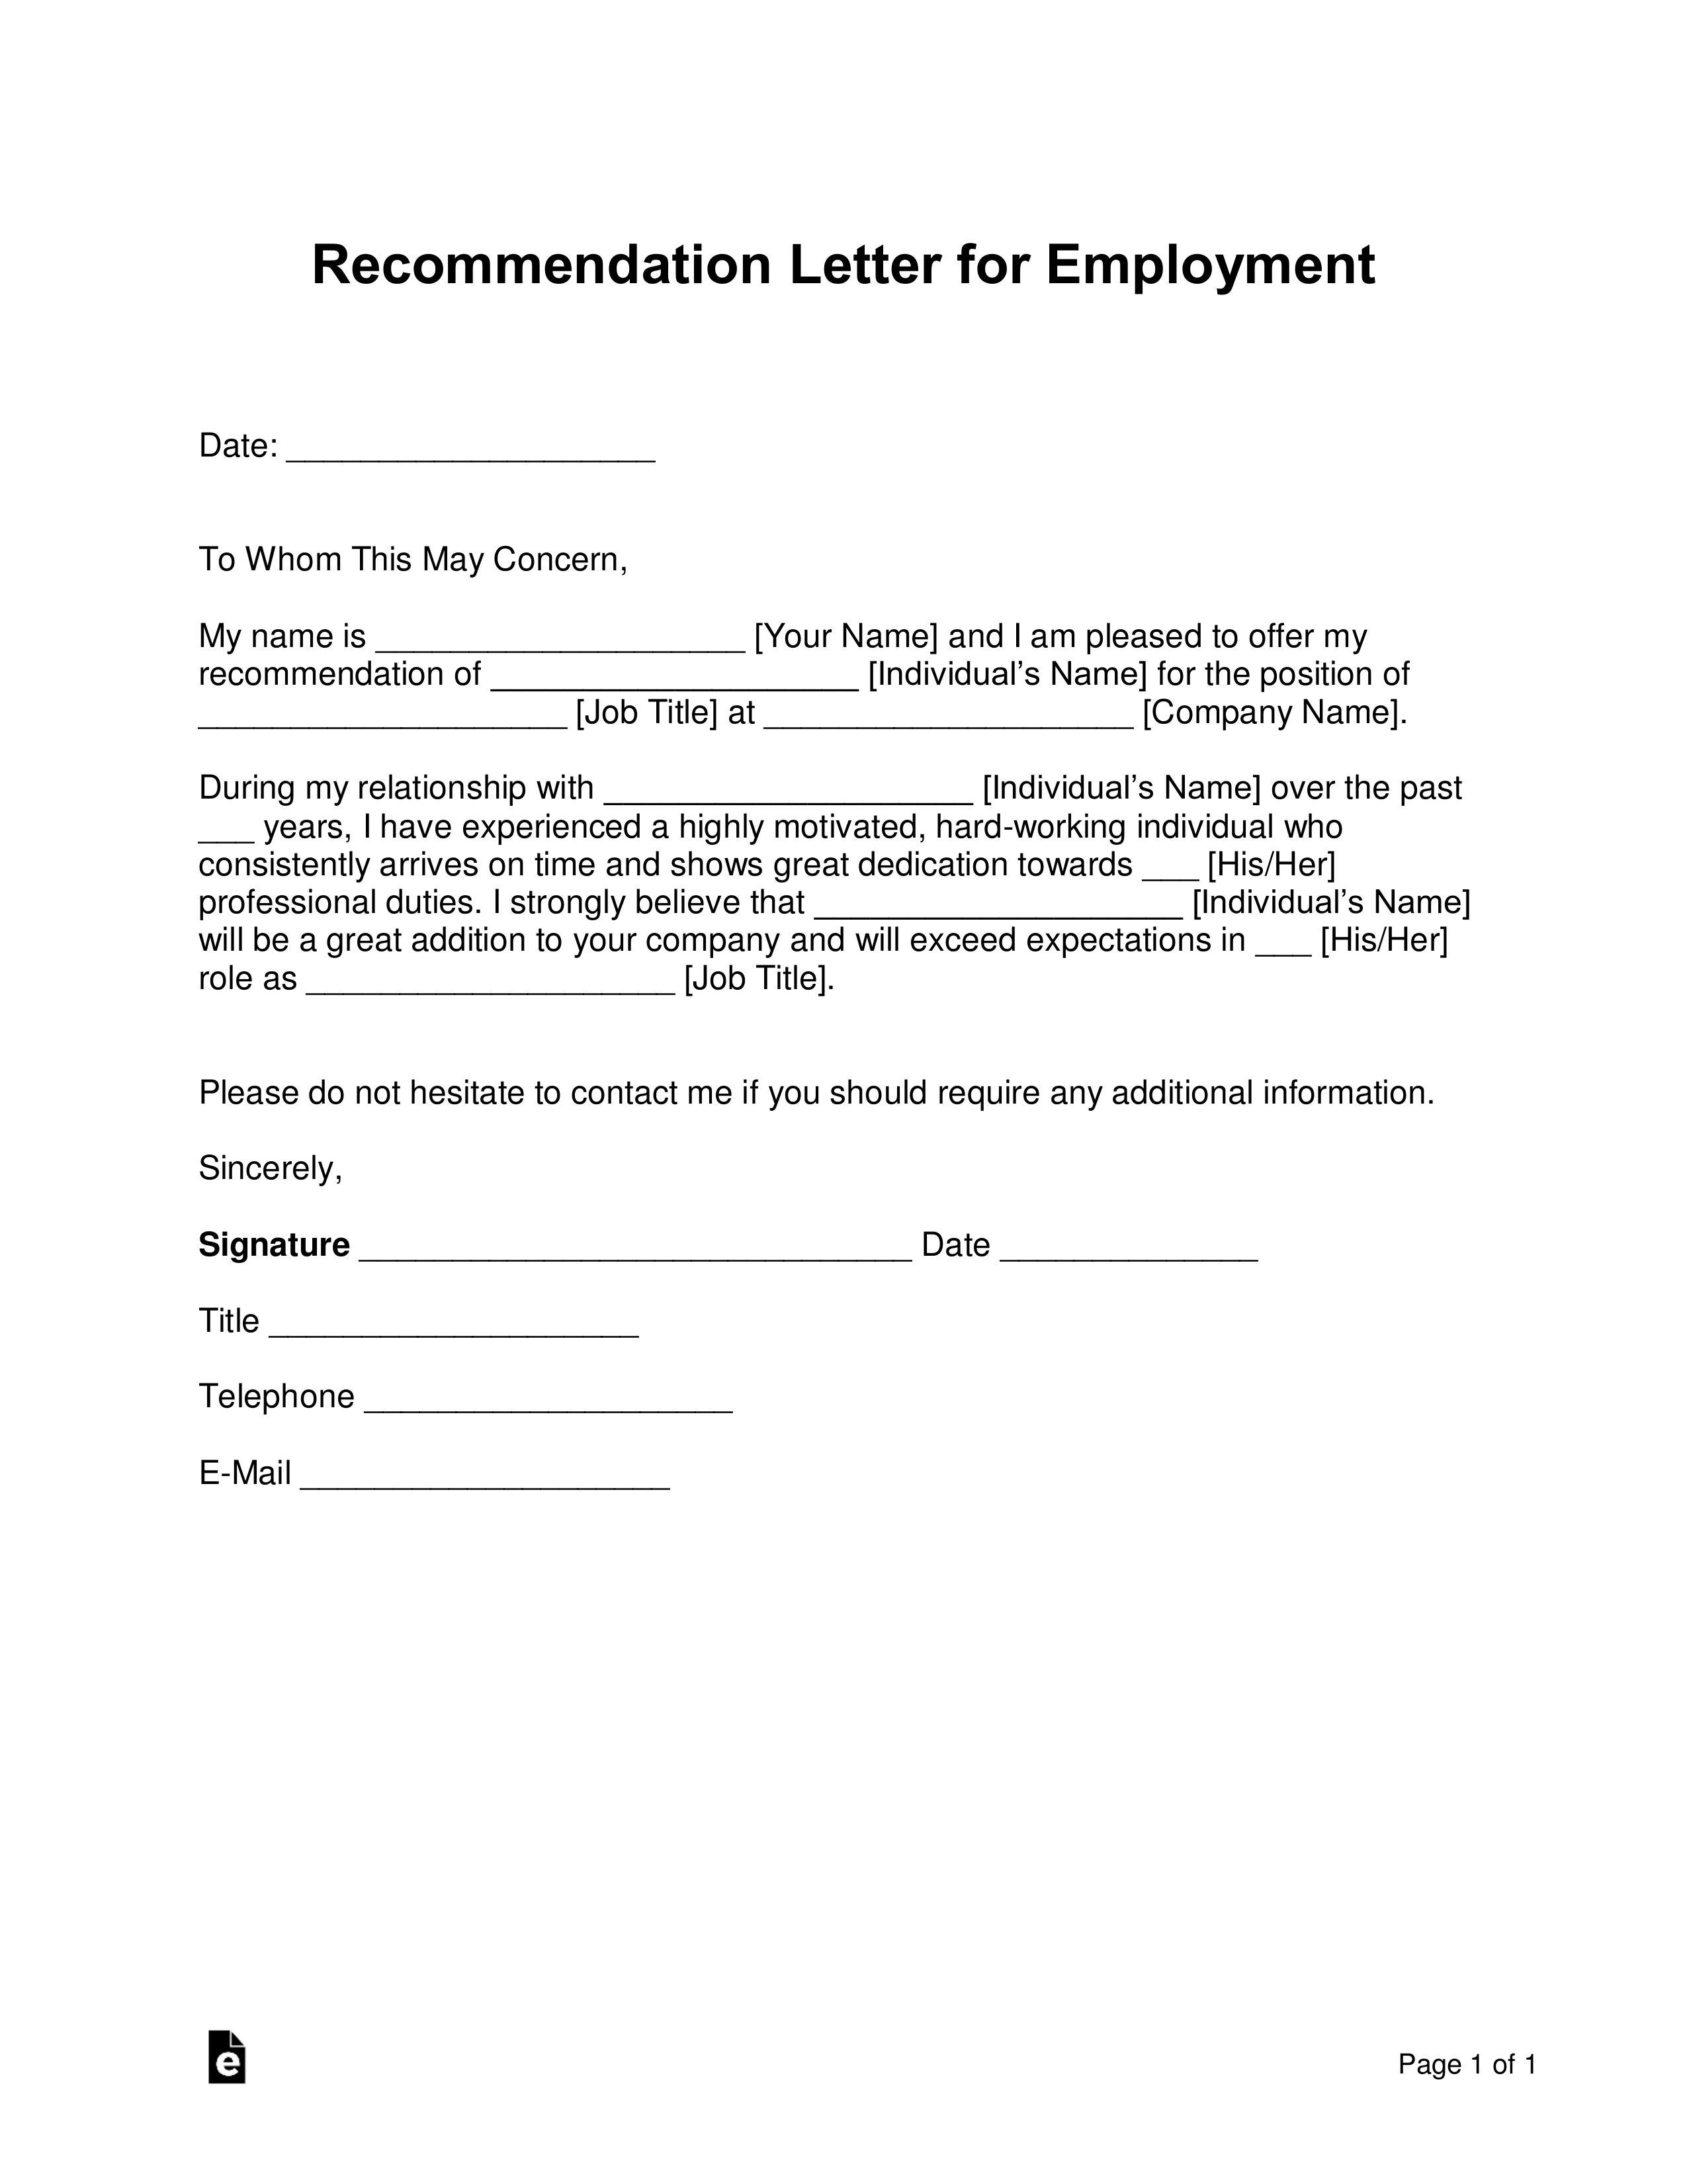 Sample Letter Of Recommendation Employment from eforms.com